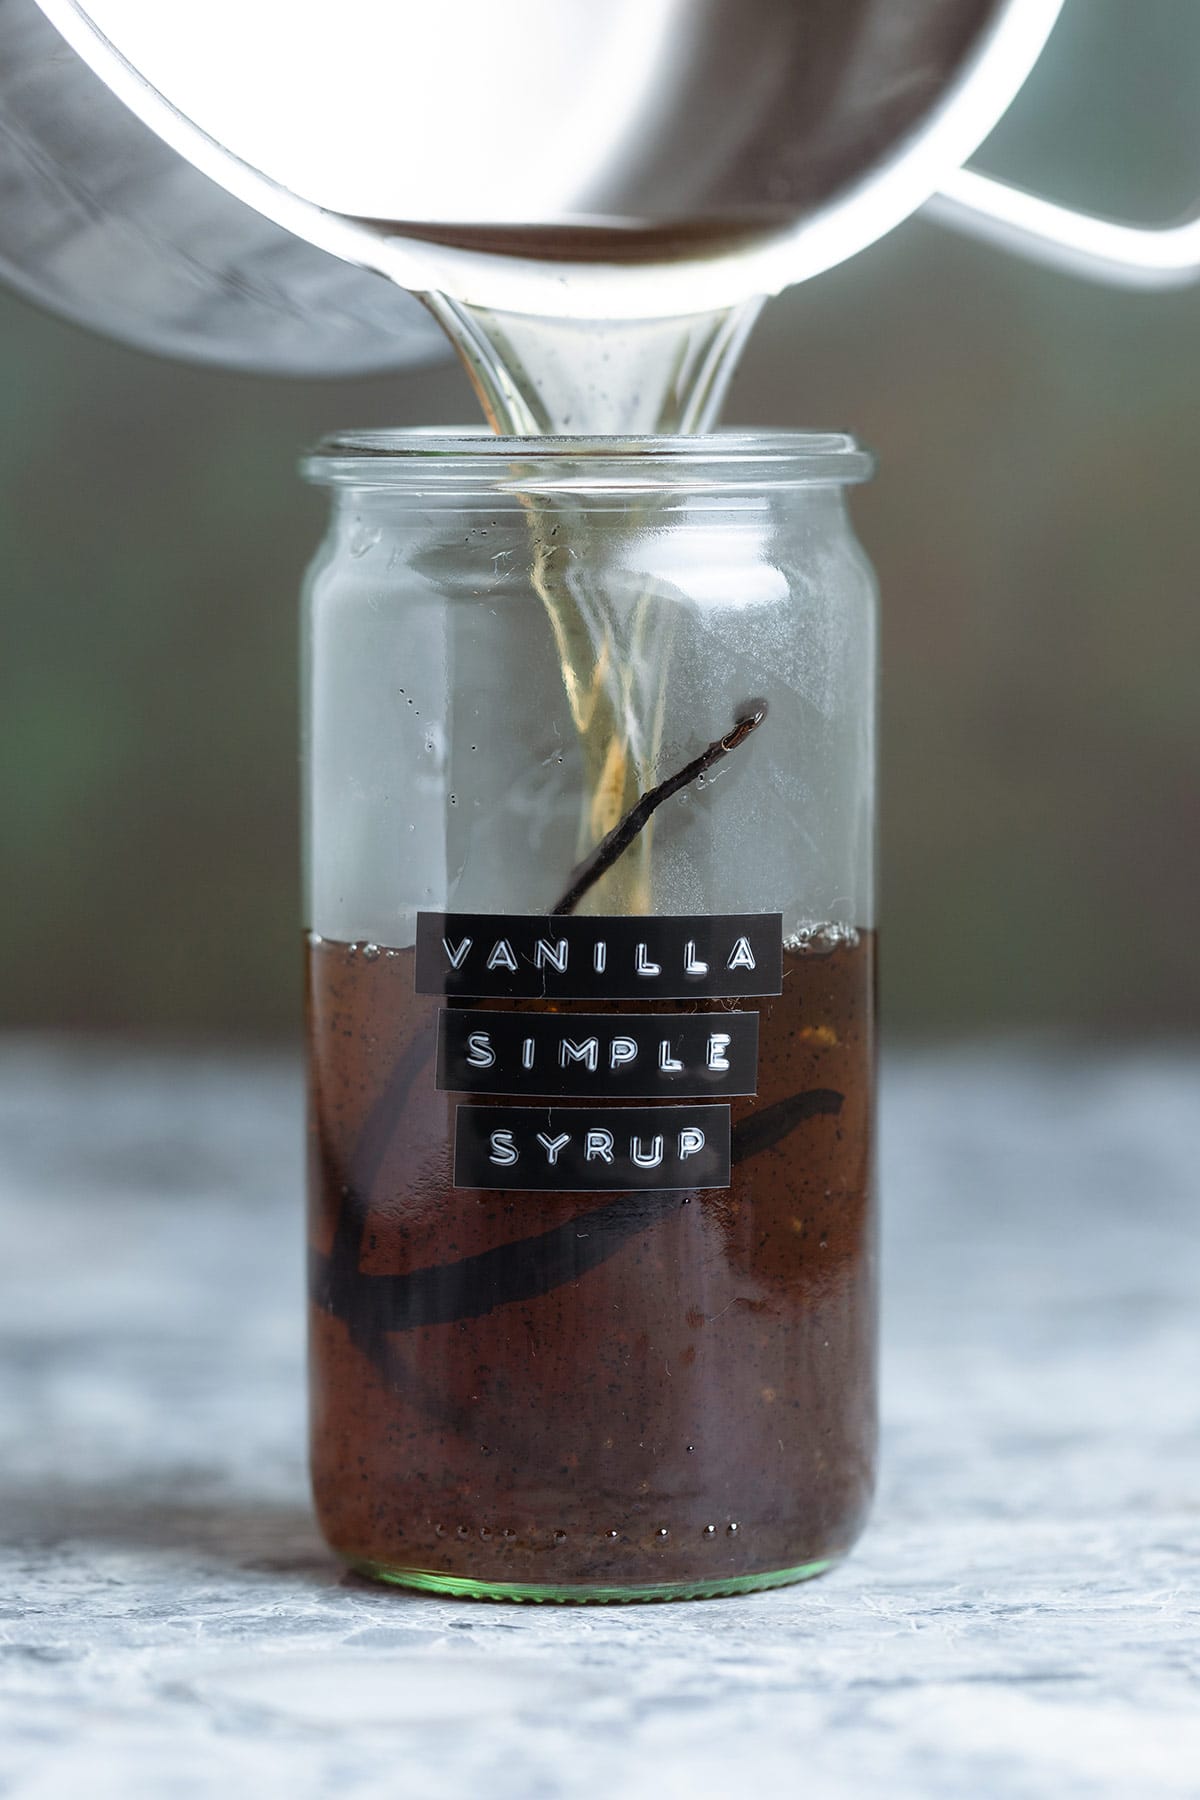 Vanilla syrup being poured into a glass jar with vanilla simple syrup label on it and a whole vanilla bean inside.